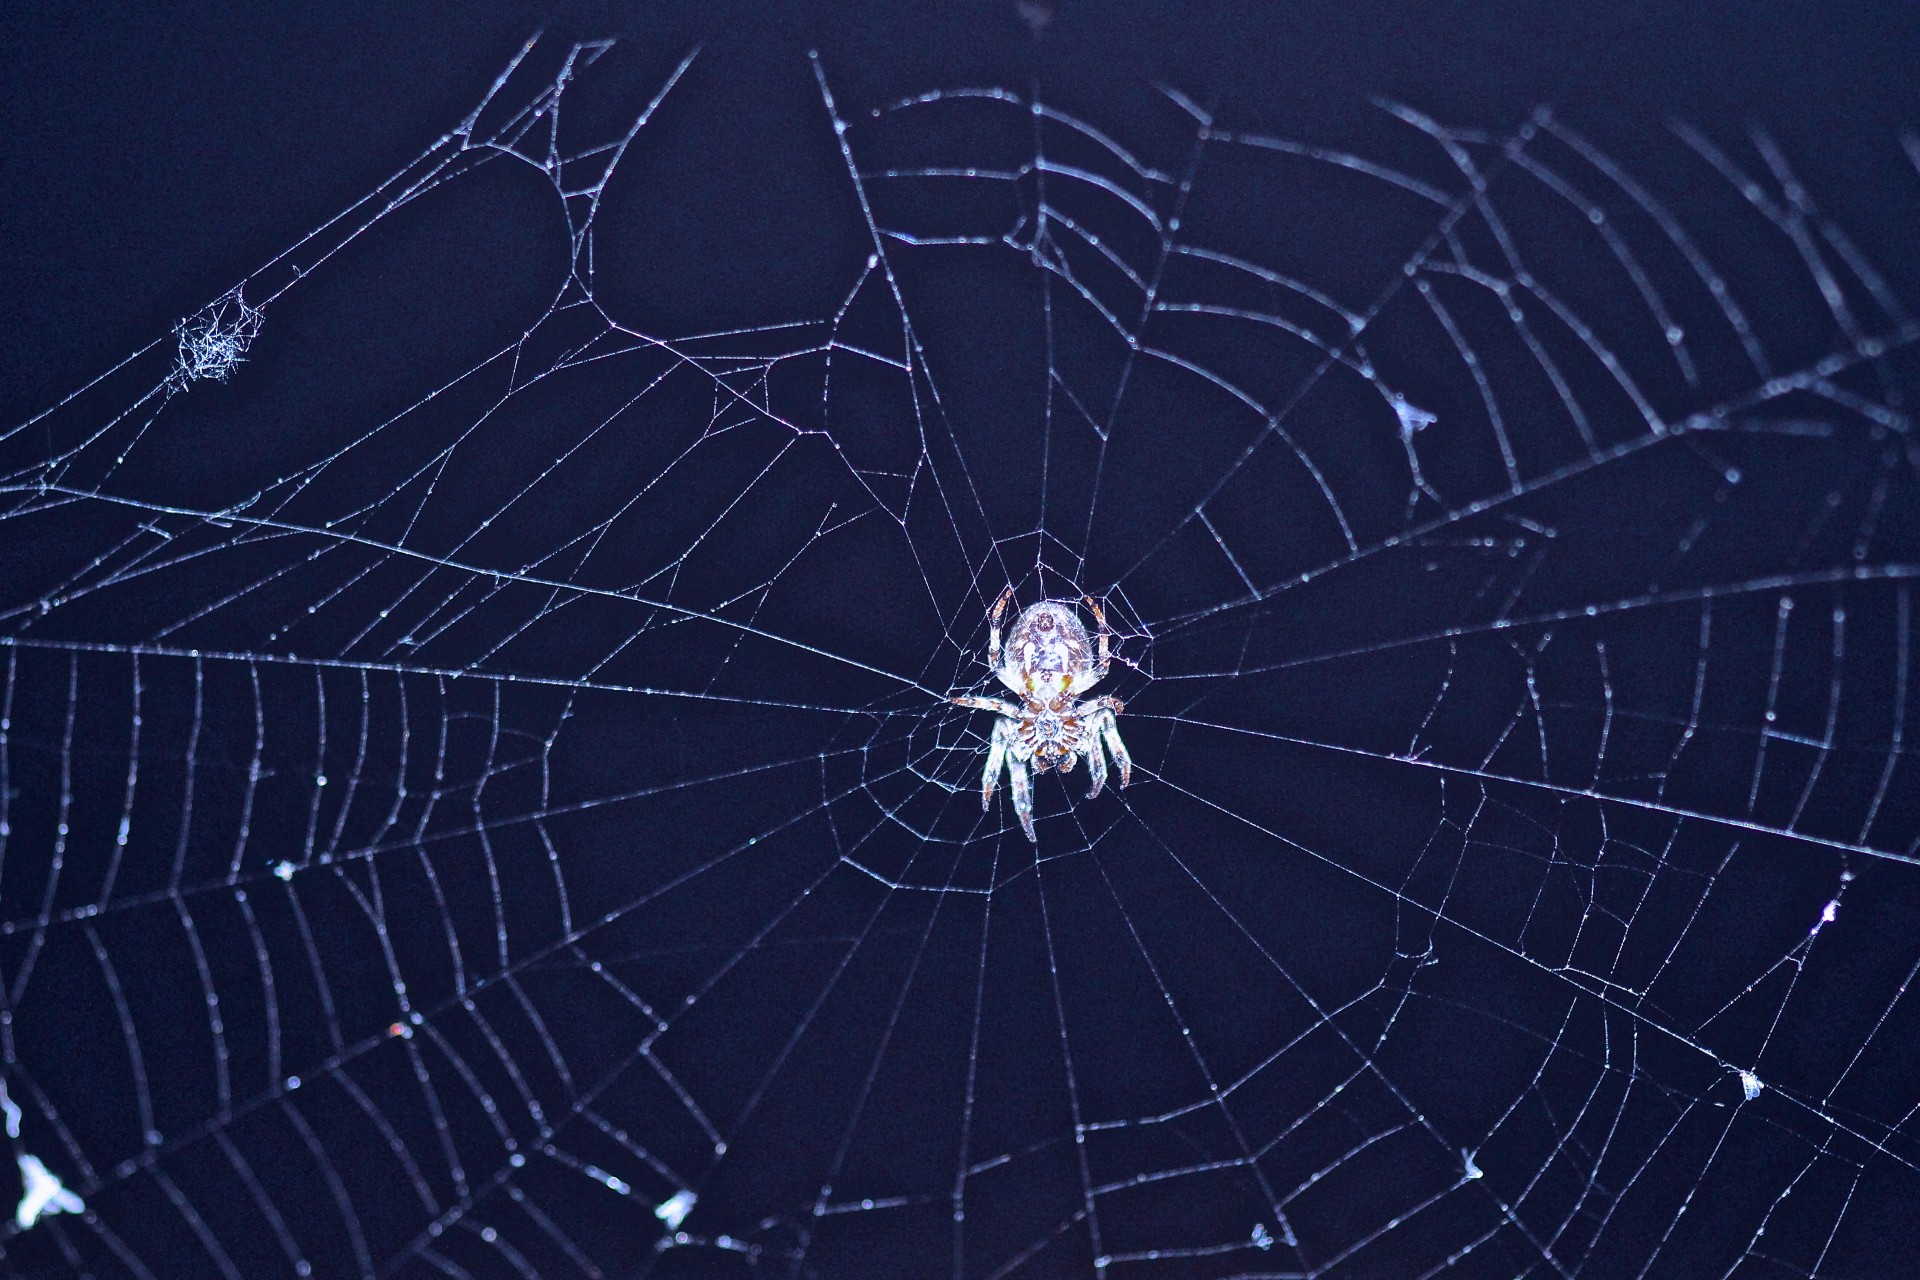 spider-and-spiderweb-free-stock-photo-public-domain-pictures